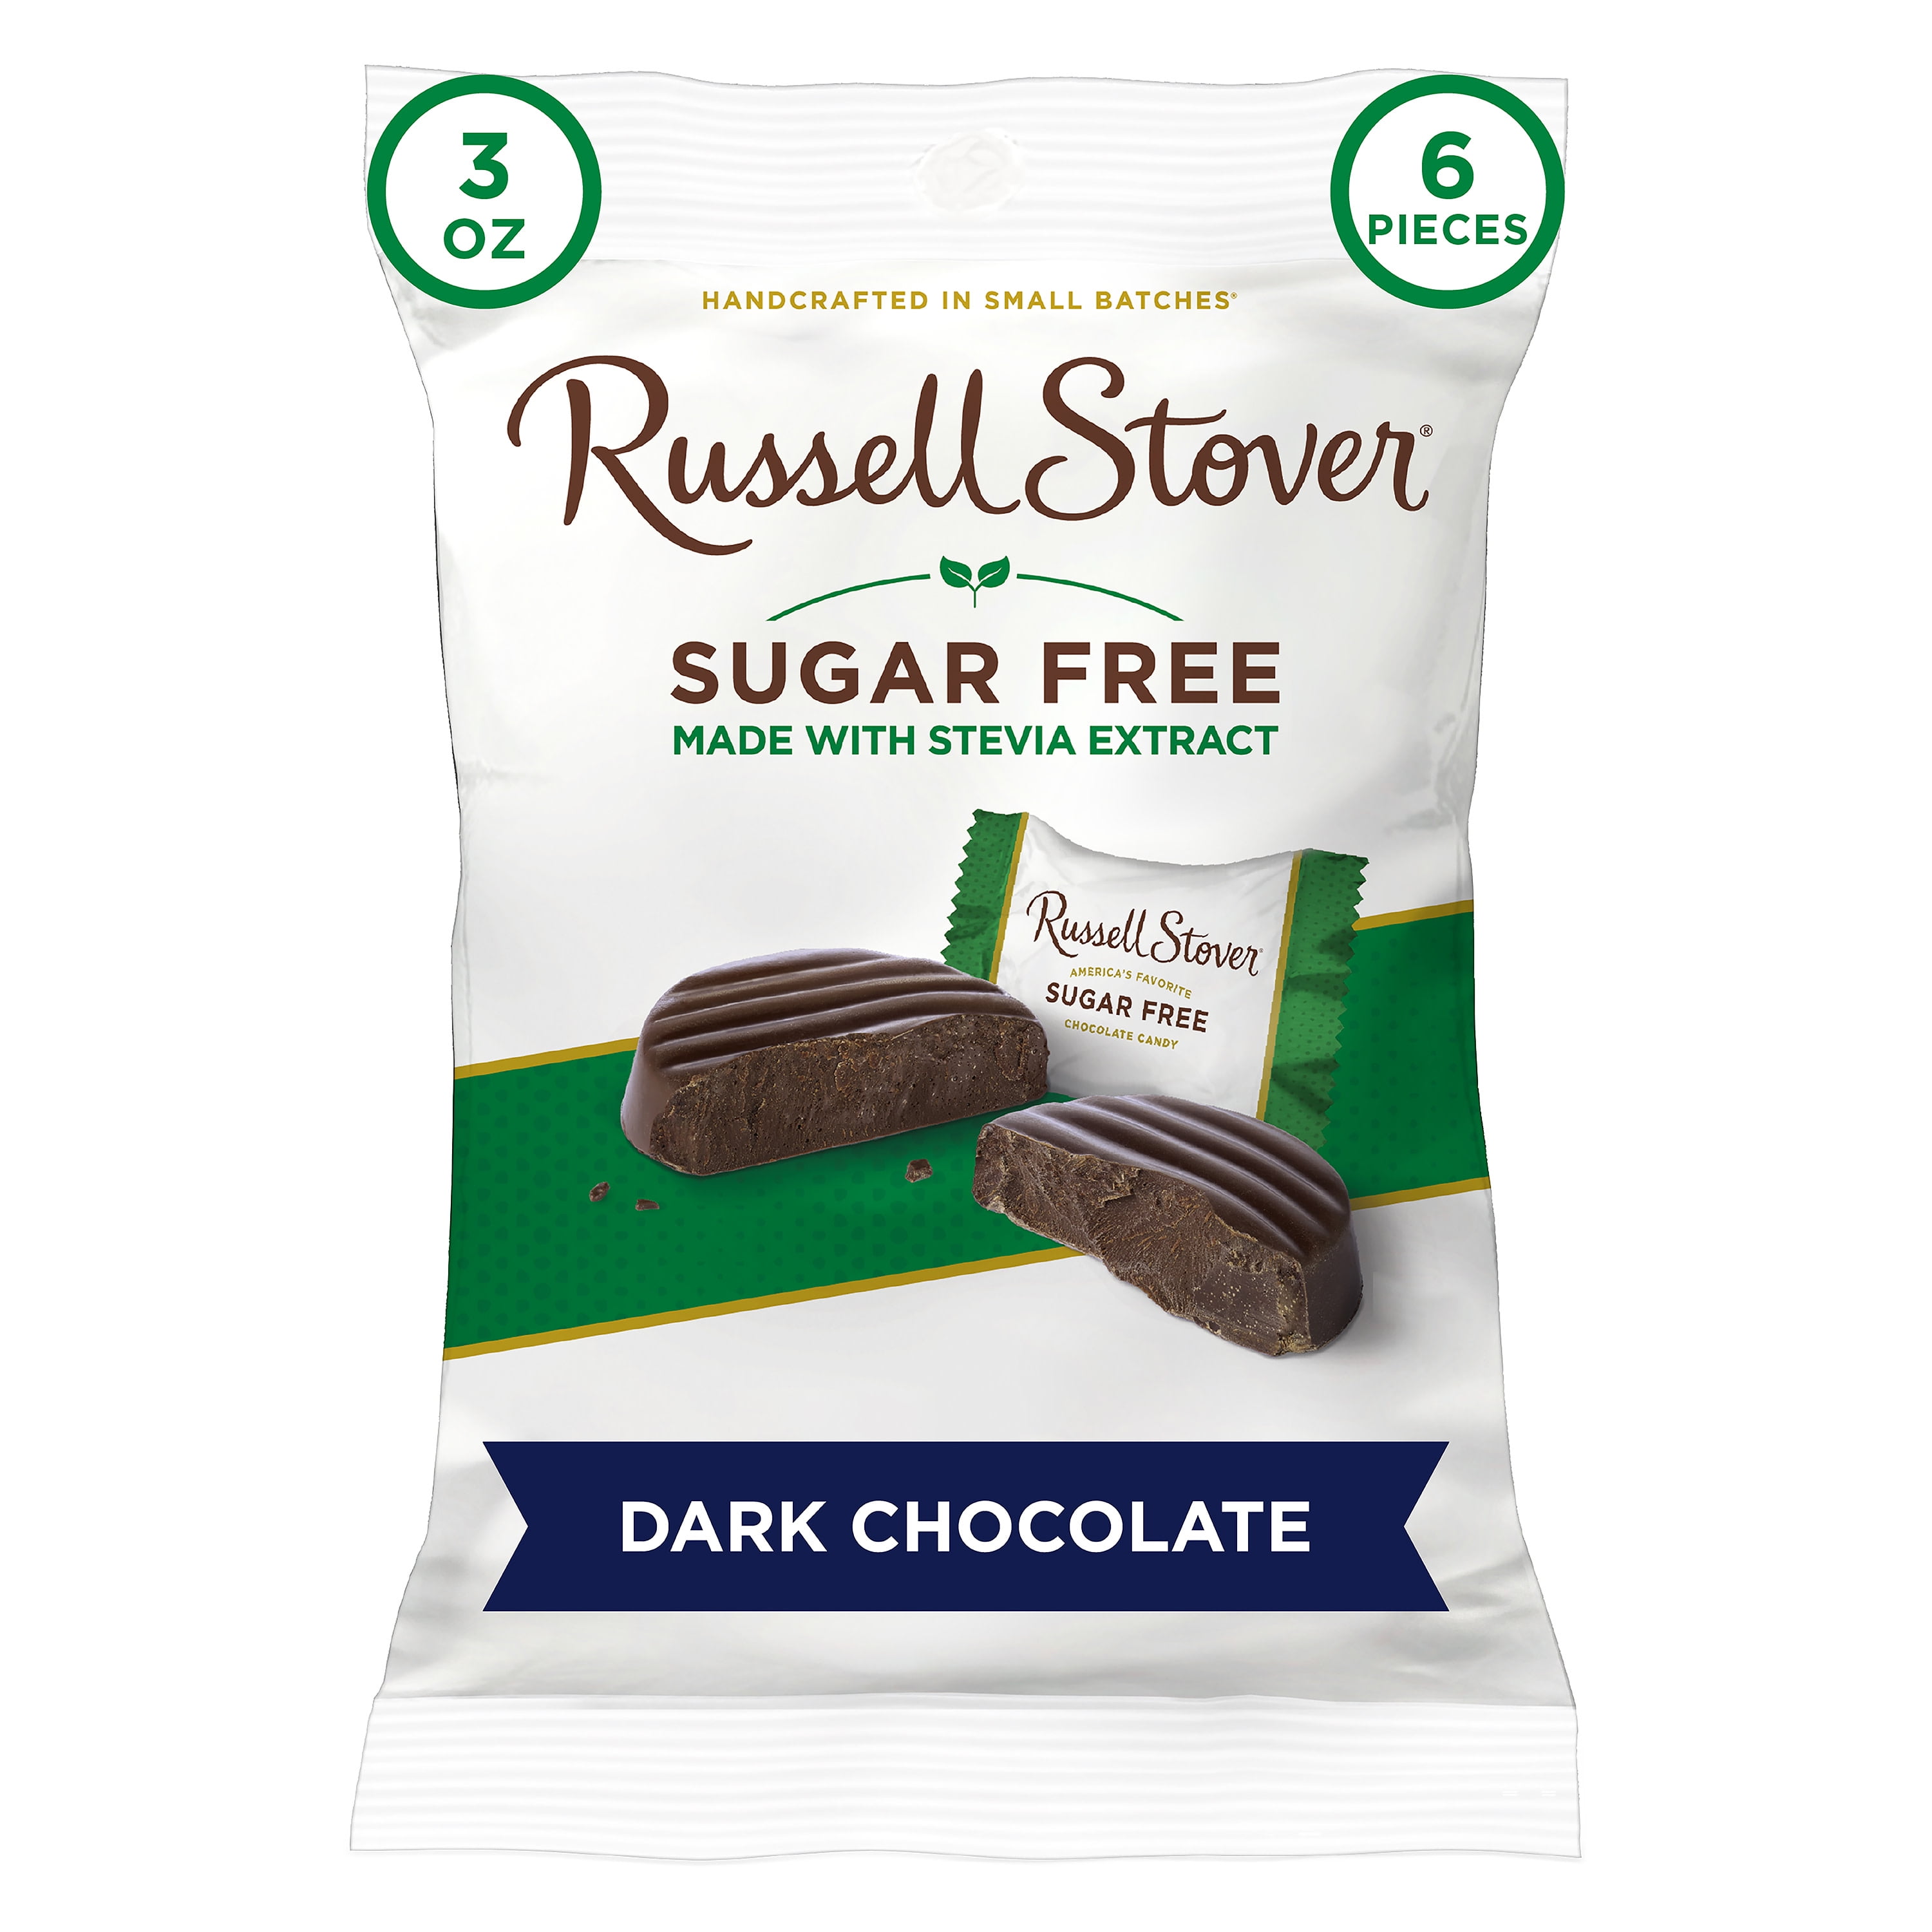 Russell Stover Sugar Free Dark Chocolate with Stevia, 3 oz. Bag